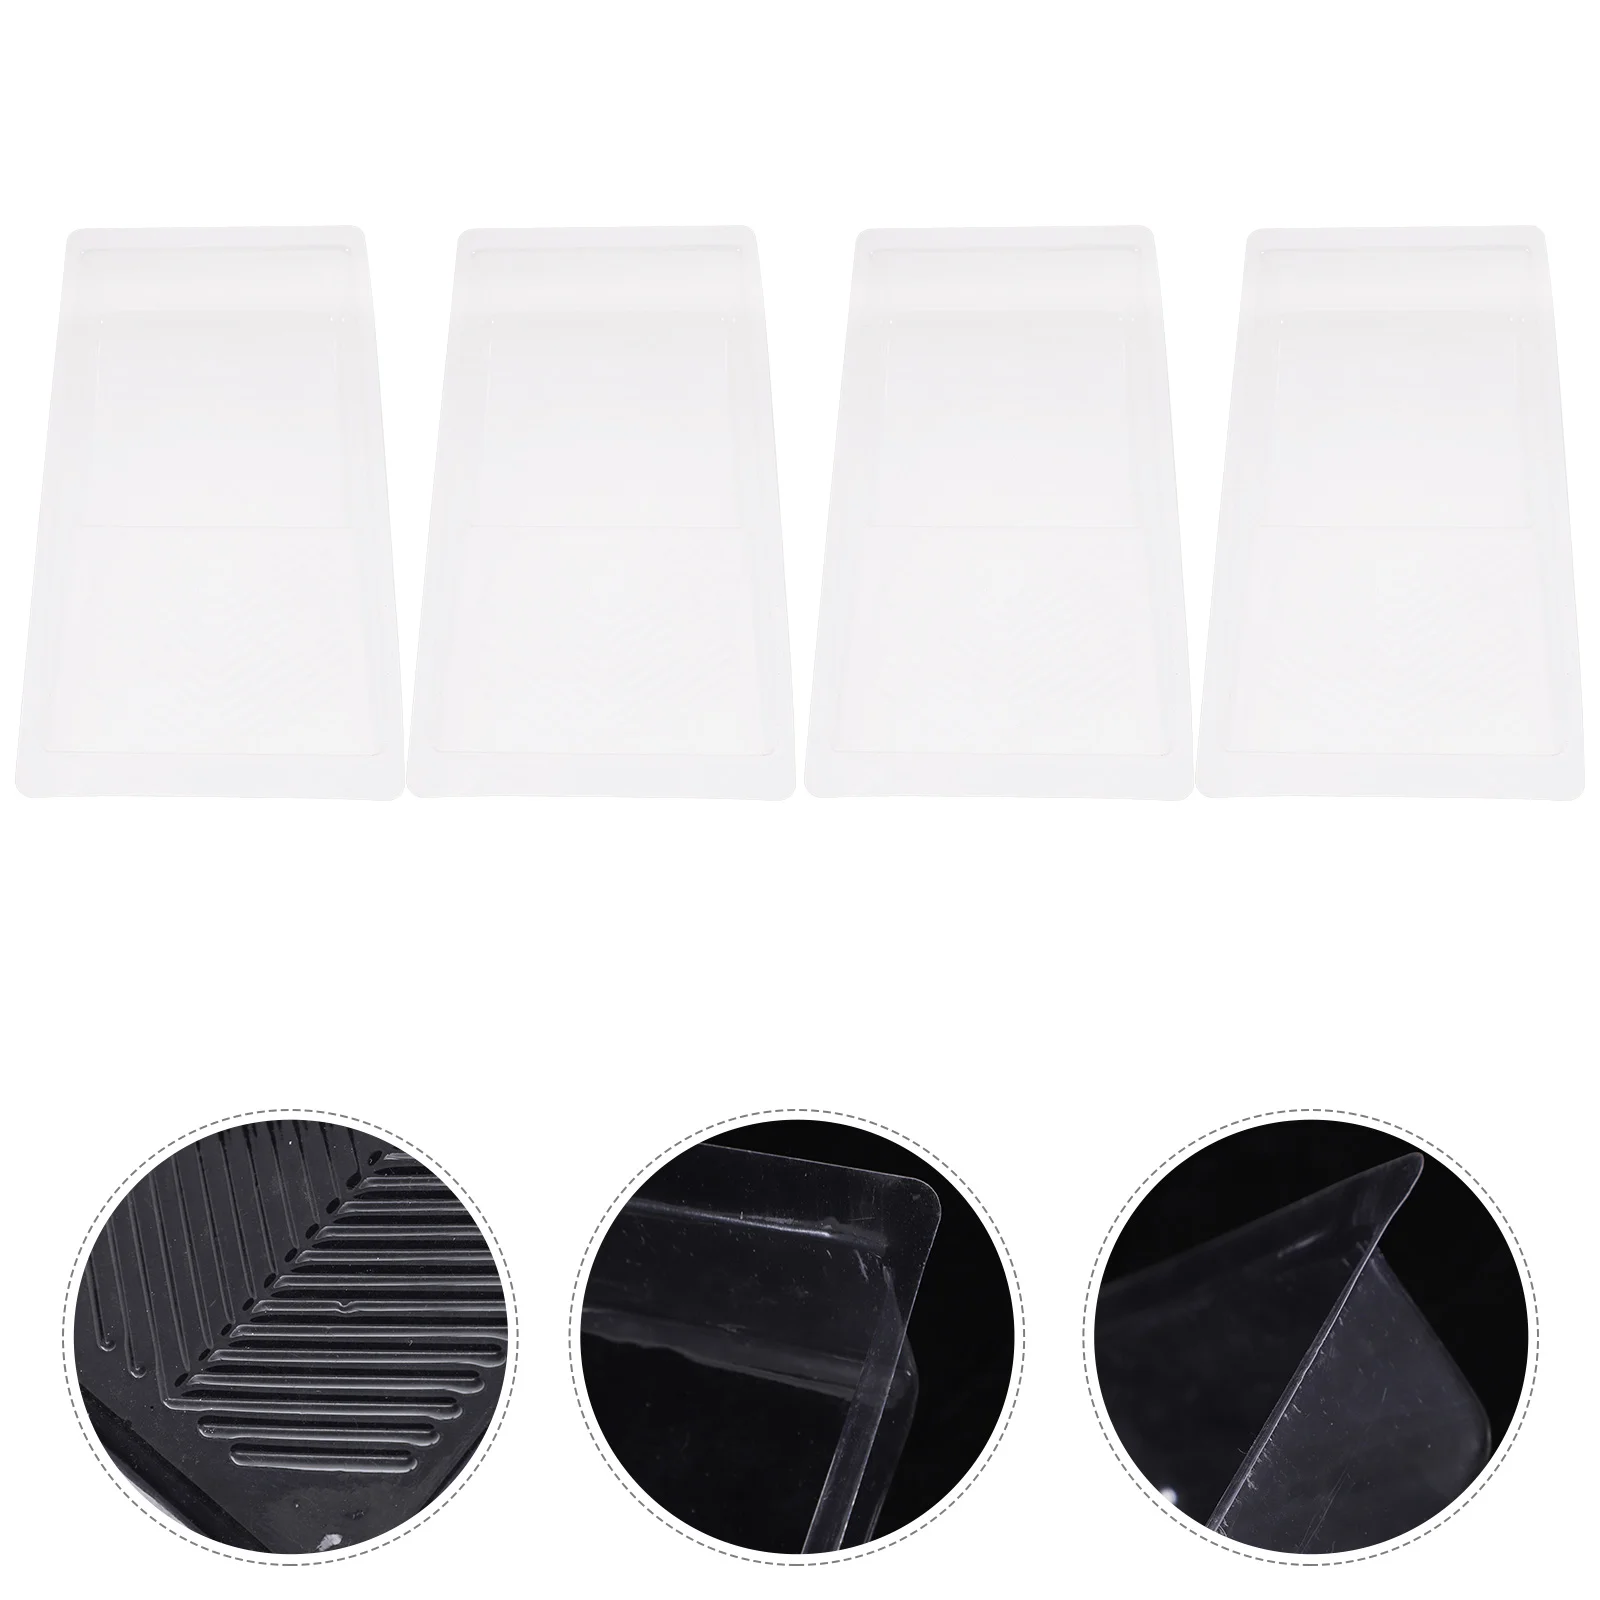 

4 Pcs Tray Lining Liners for Paint Trays Painting Supply Pan Pvc Transparent Reusable Roller